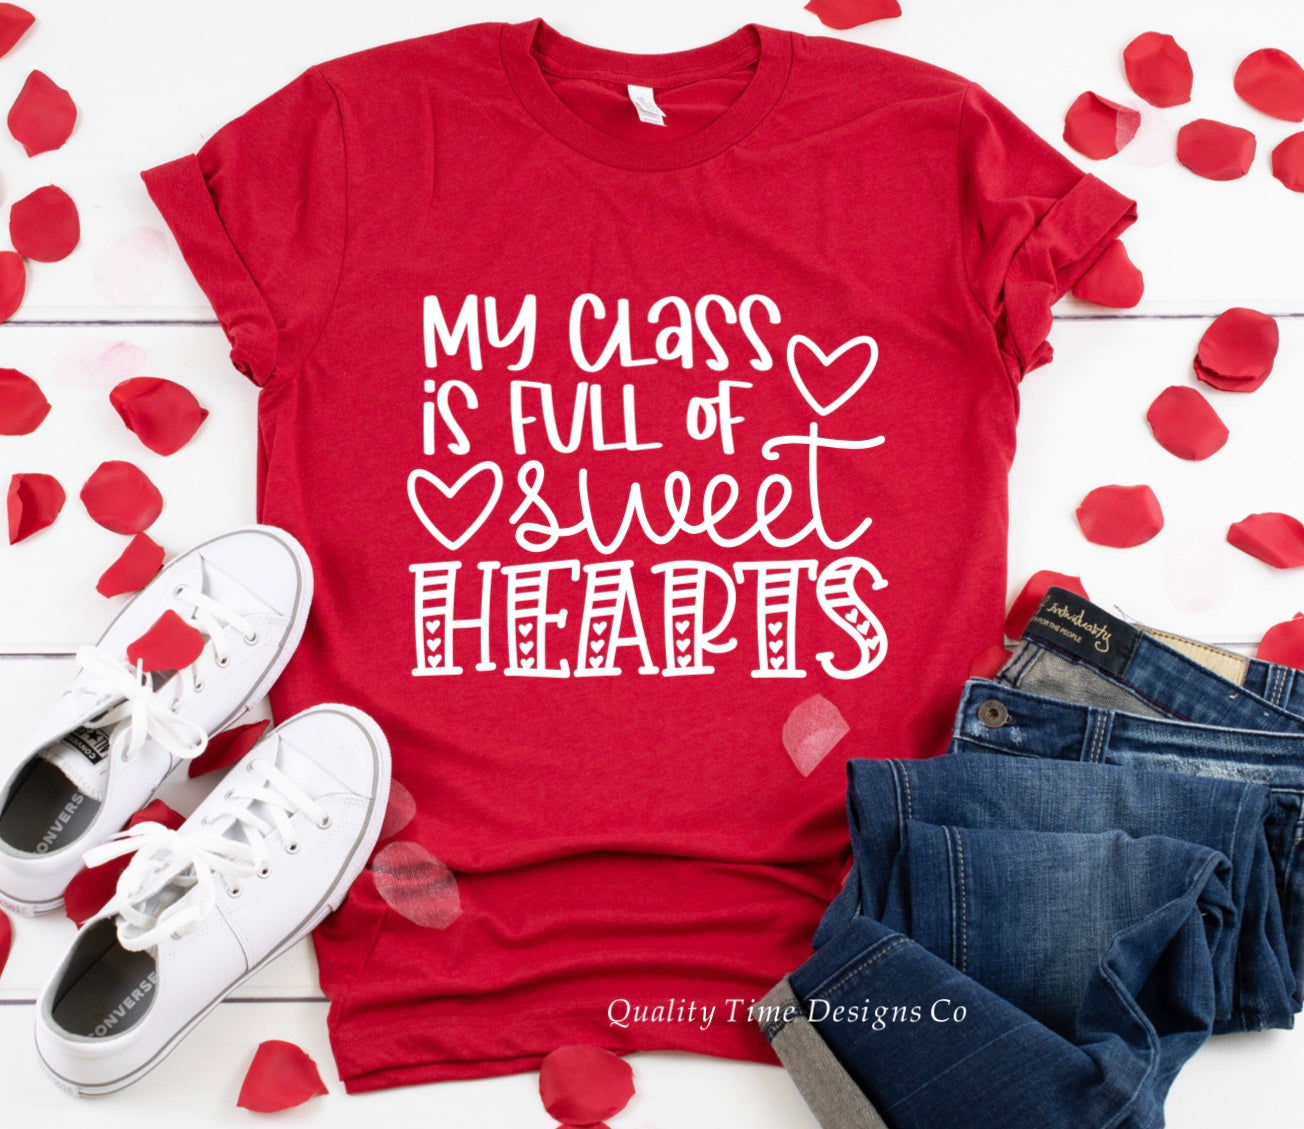 My class is full of sweethearts t-shirt 